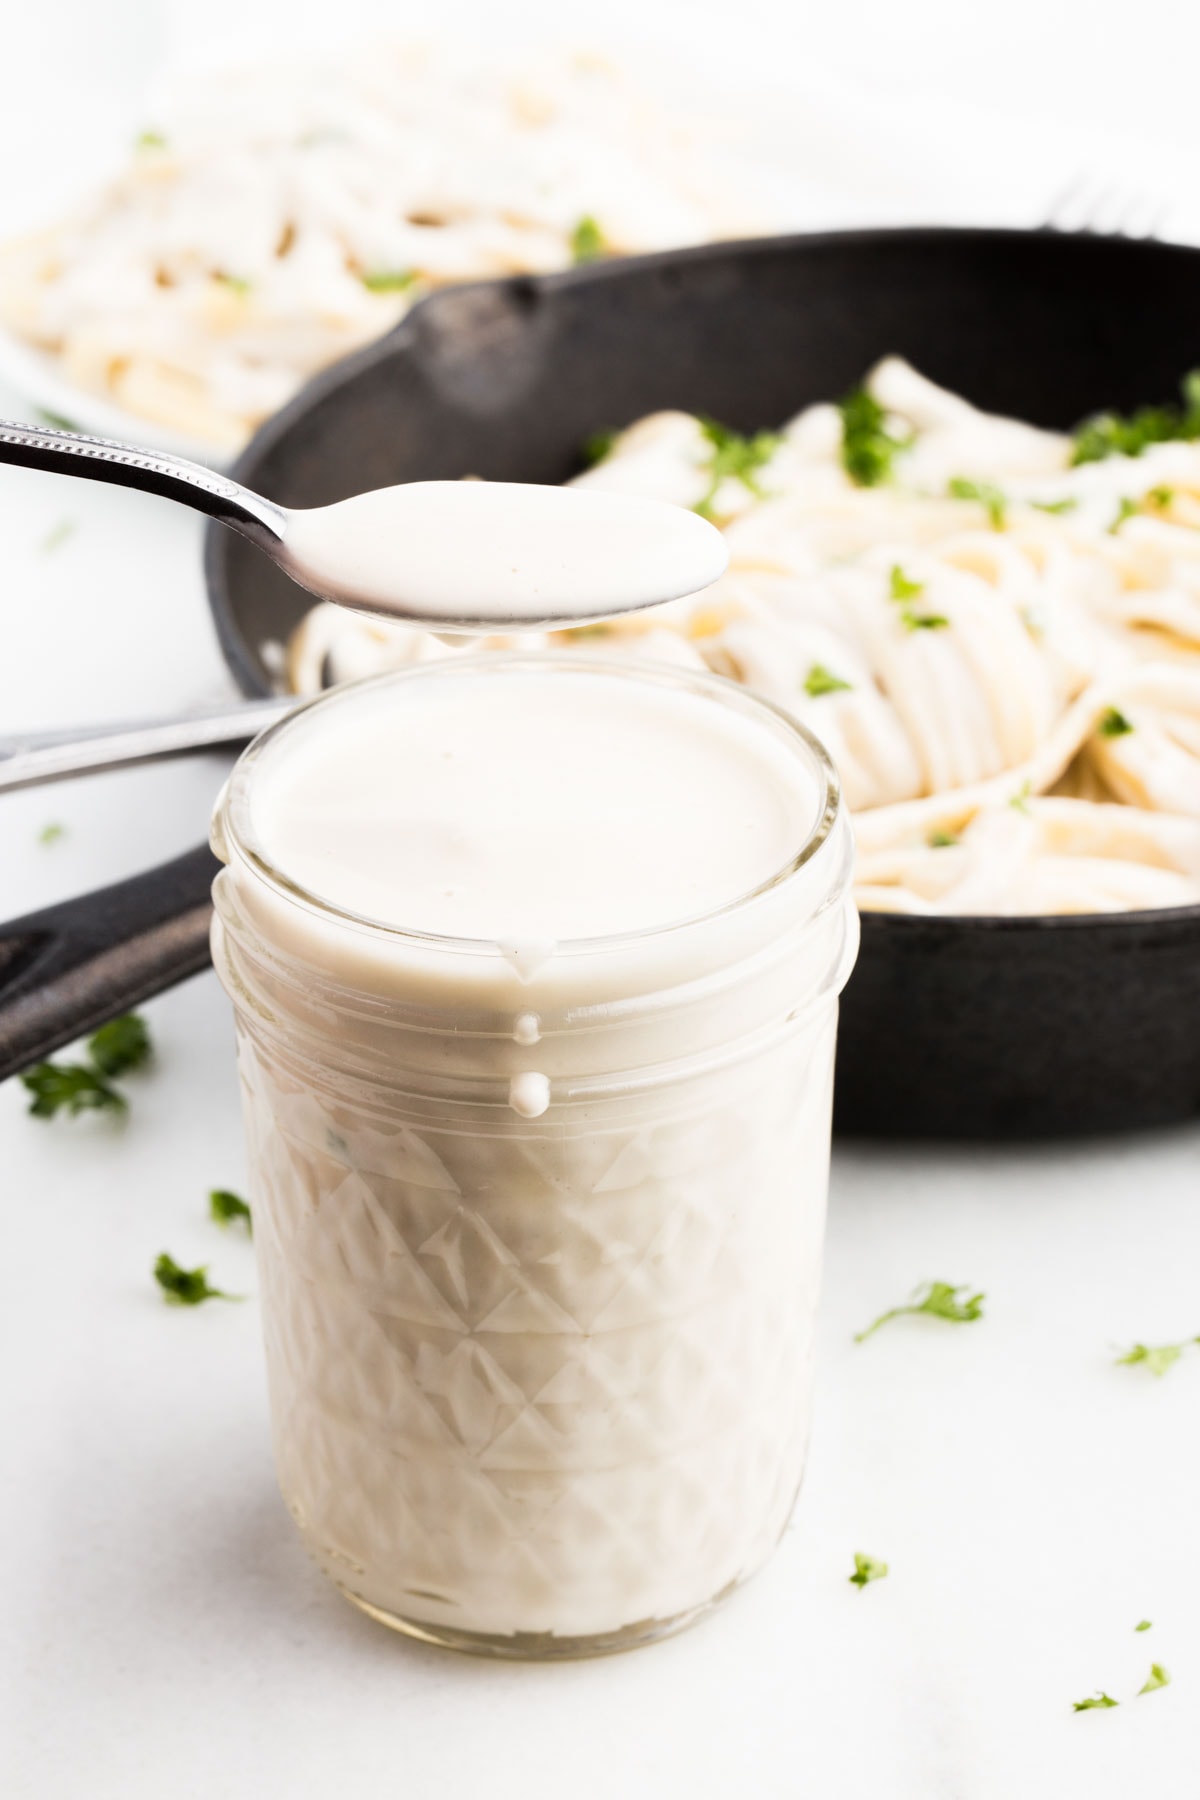 vegan alfredo sauce in spoon held over clear glass jar with cast iron skillet in background